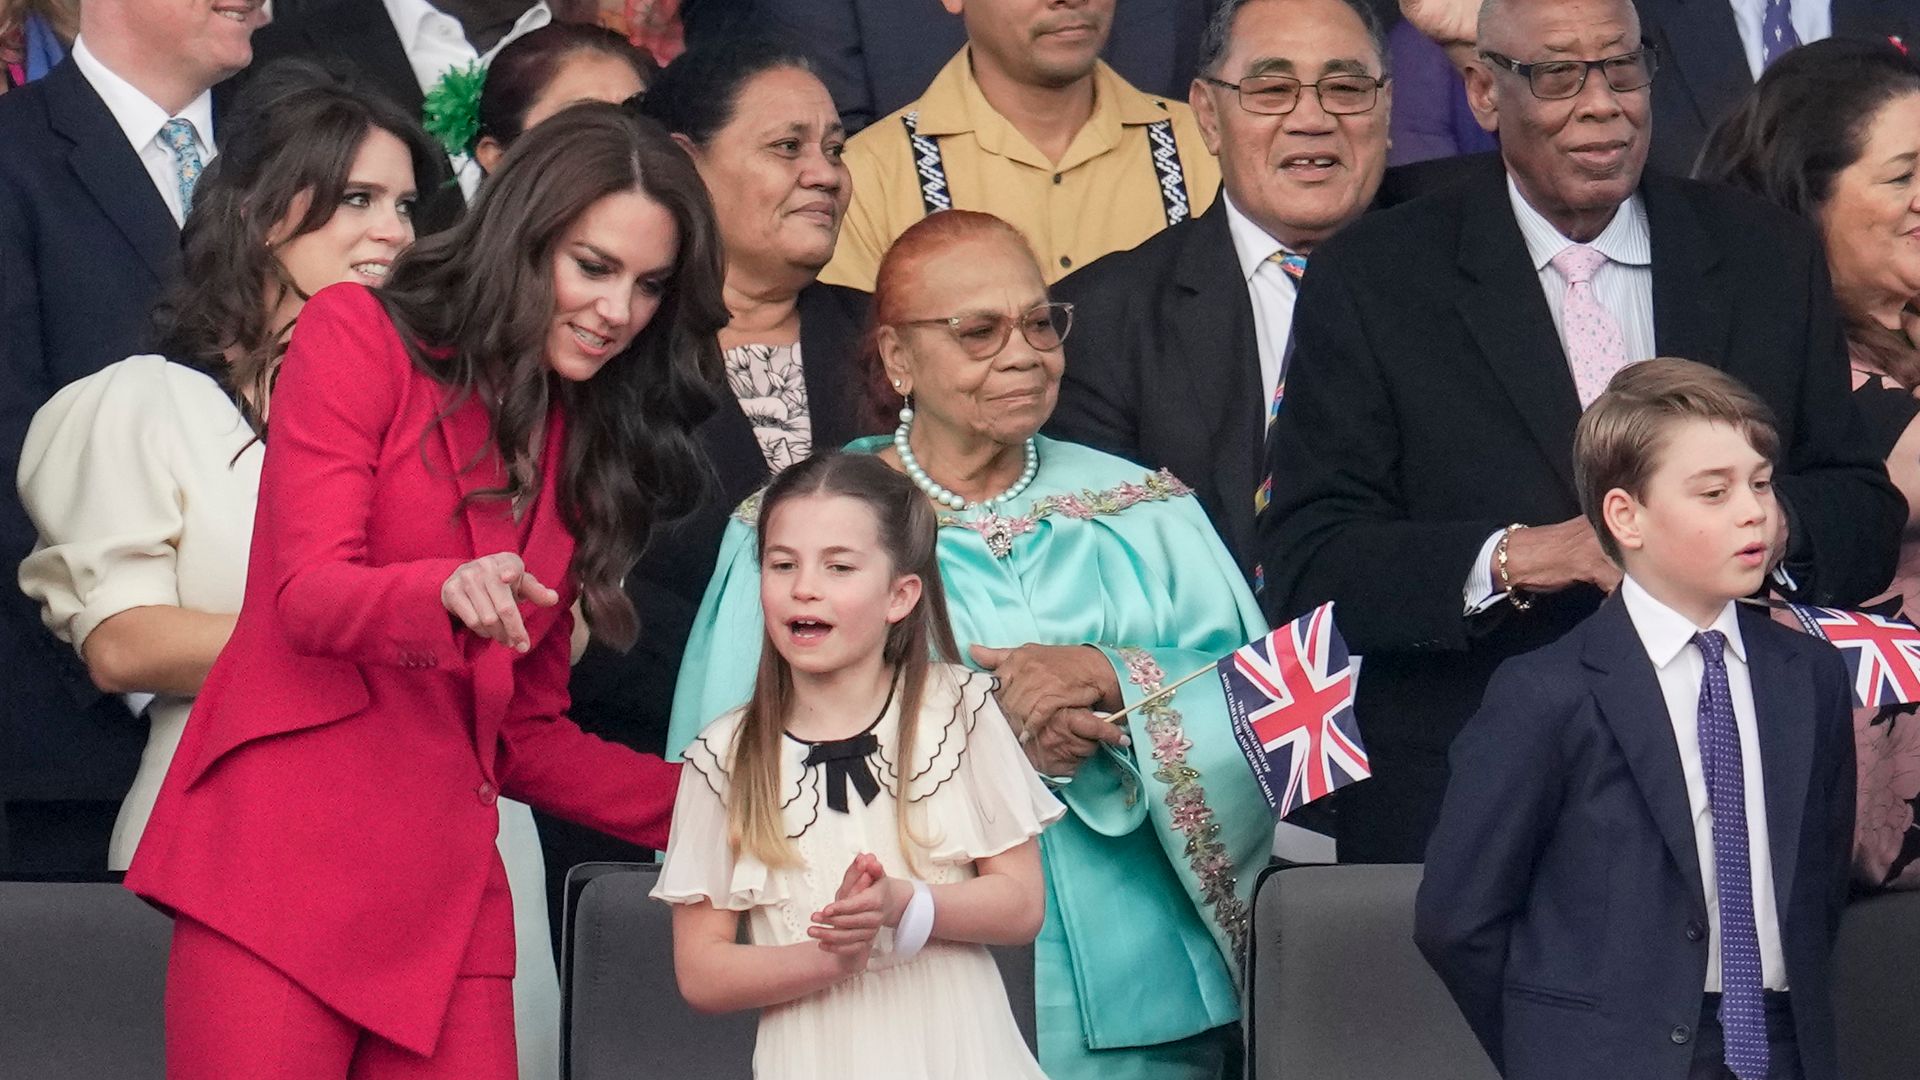 The Princess of Wales points out to Princess Charlotte where her grandparents and auntie are sitting at the coronation concert at Windsor Castle